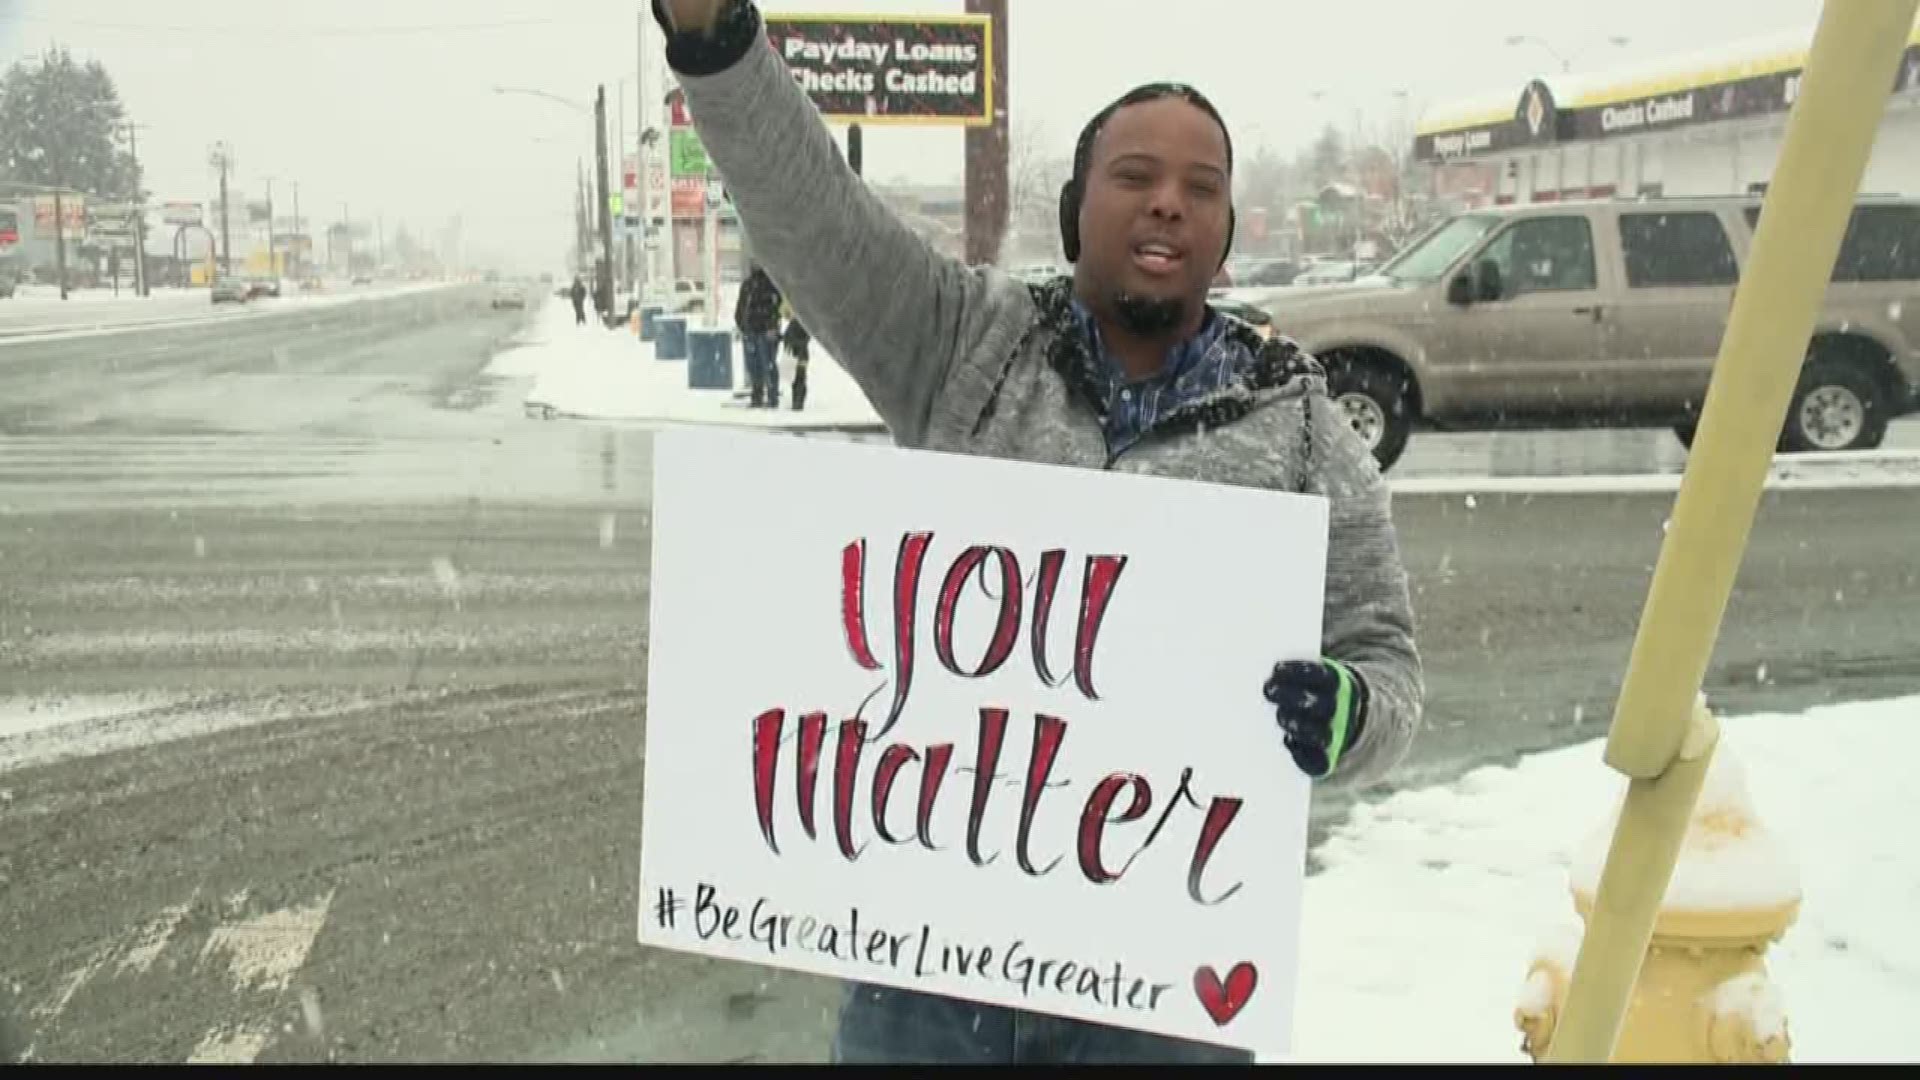 Friday brought a snowstorm to the Spokane area but Terrance Nelson stood outside in the cold reminding people they matter.